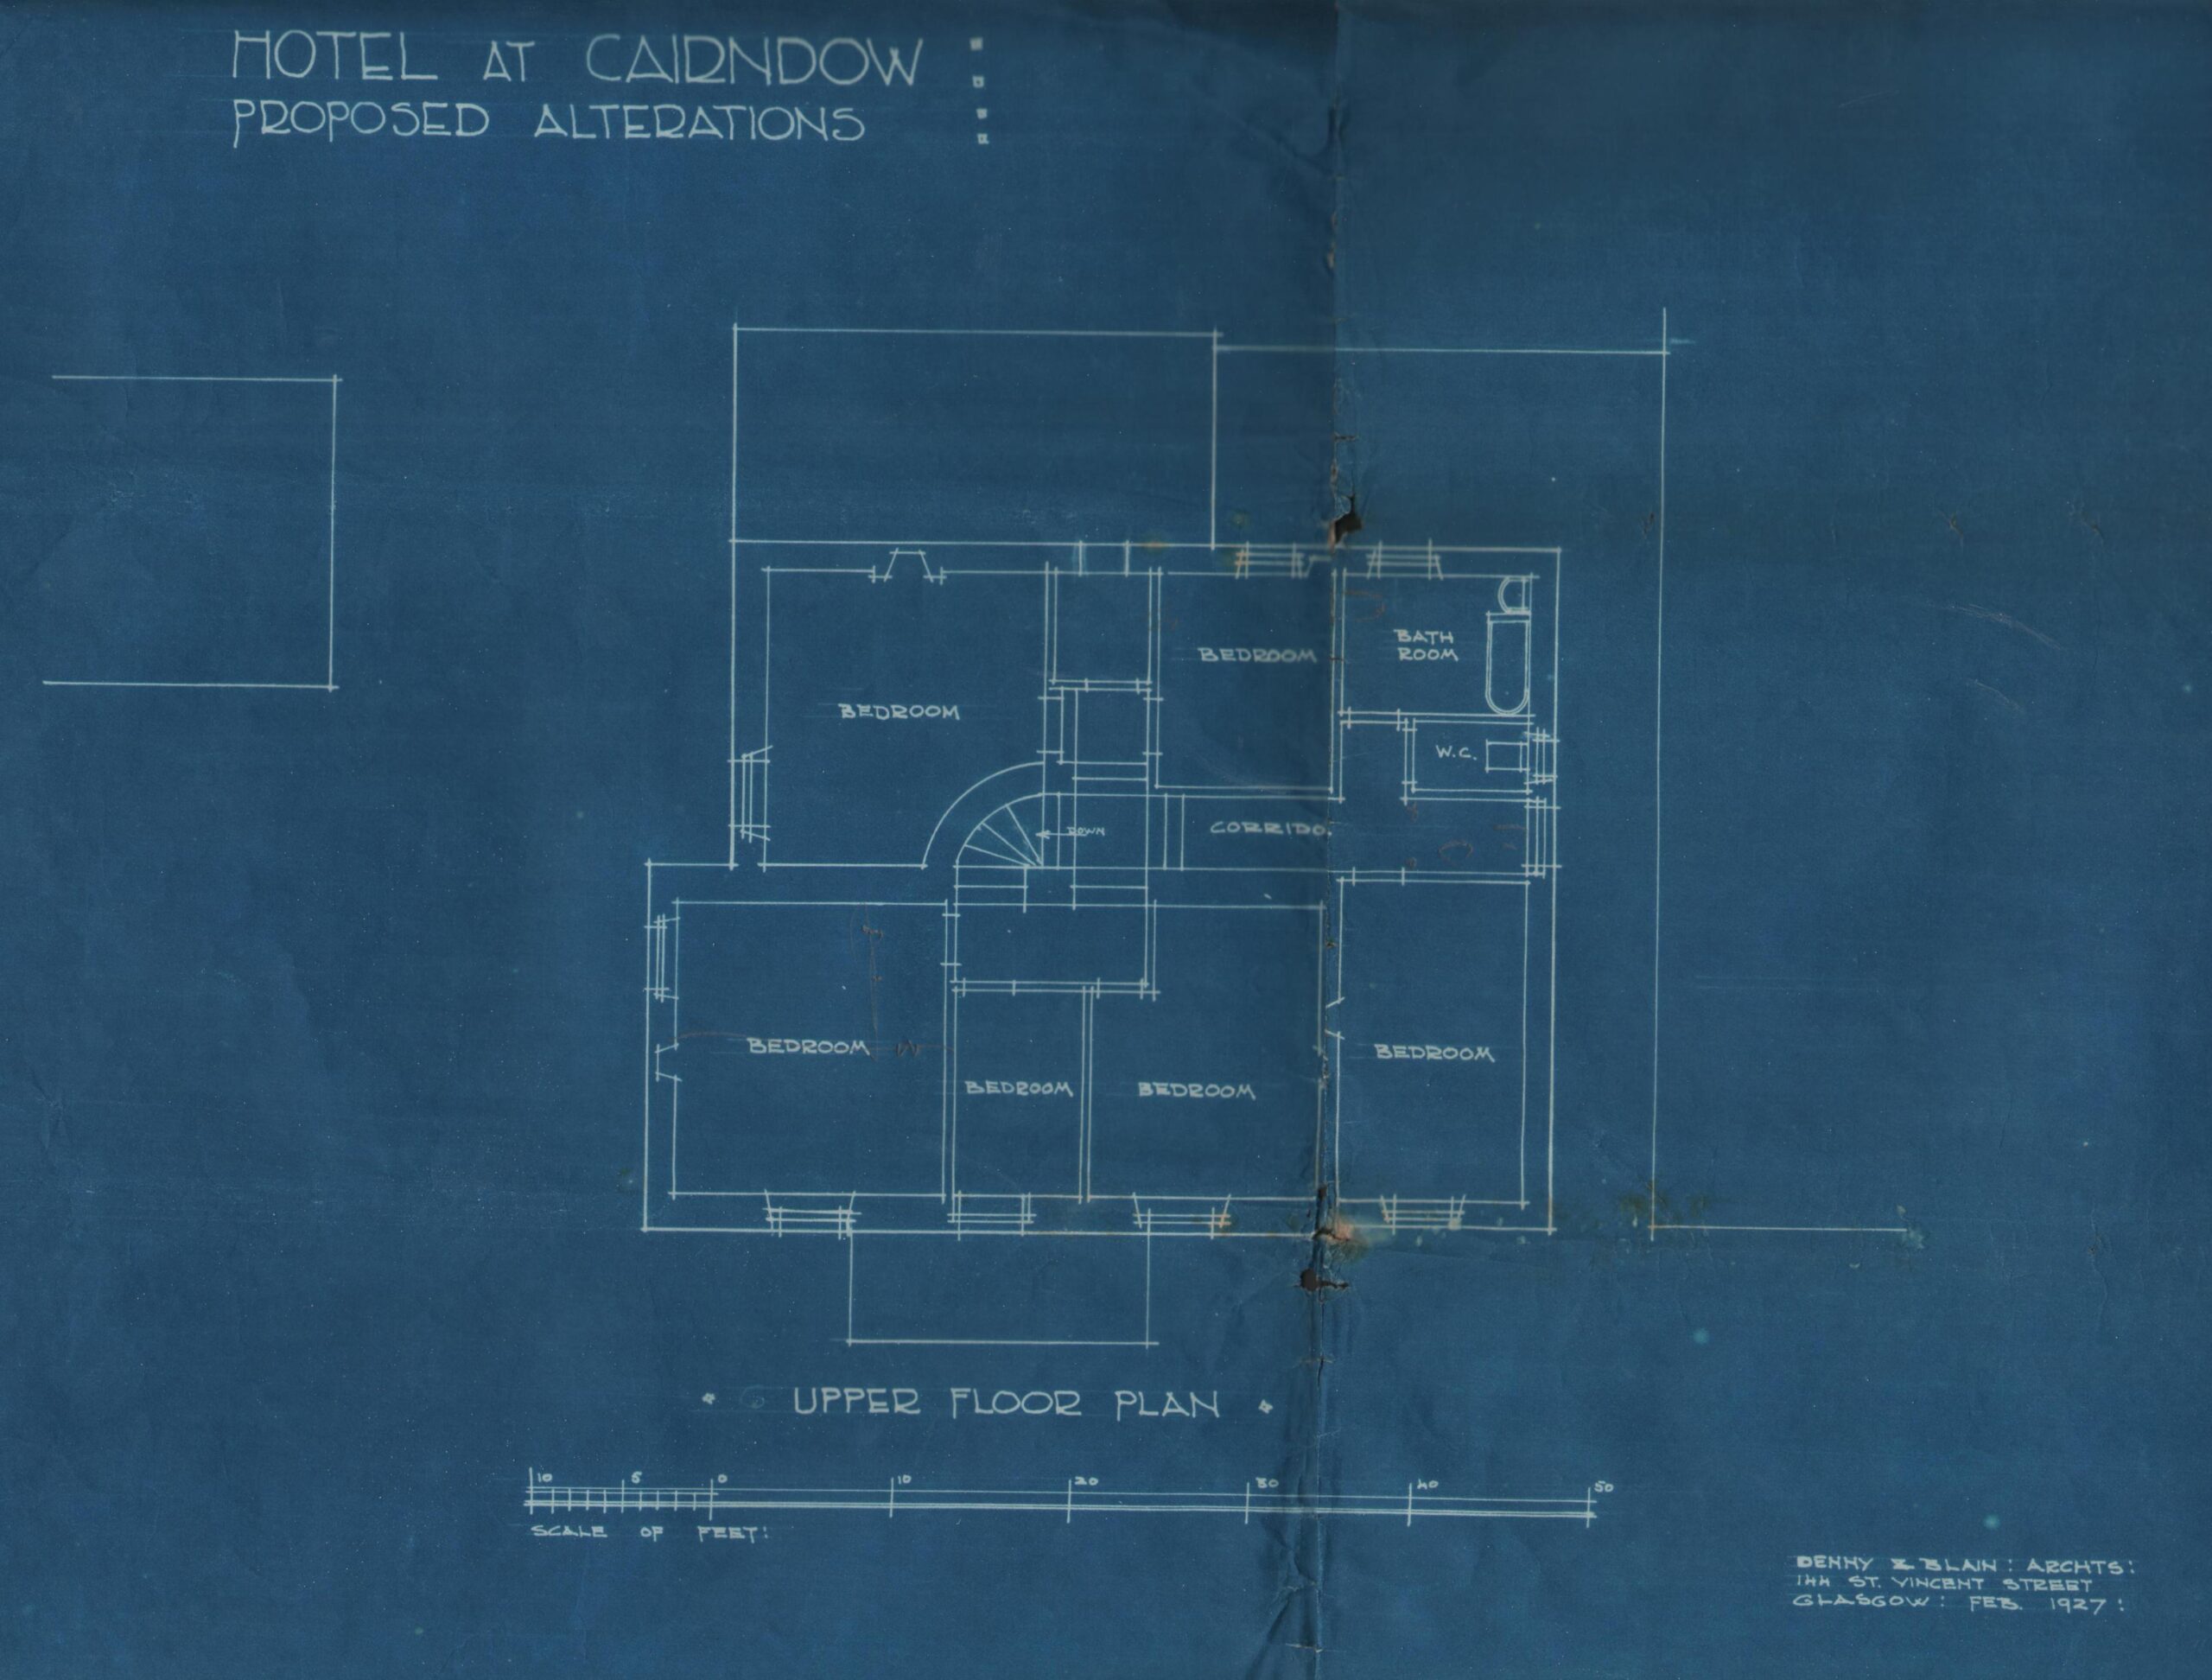 Cairndow Hotel Proposed Plans